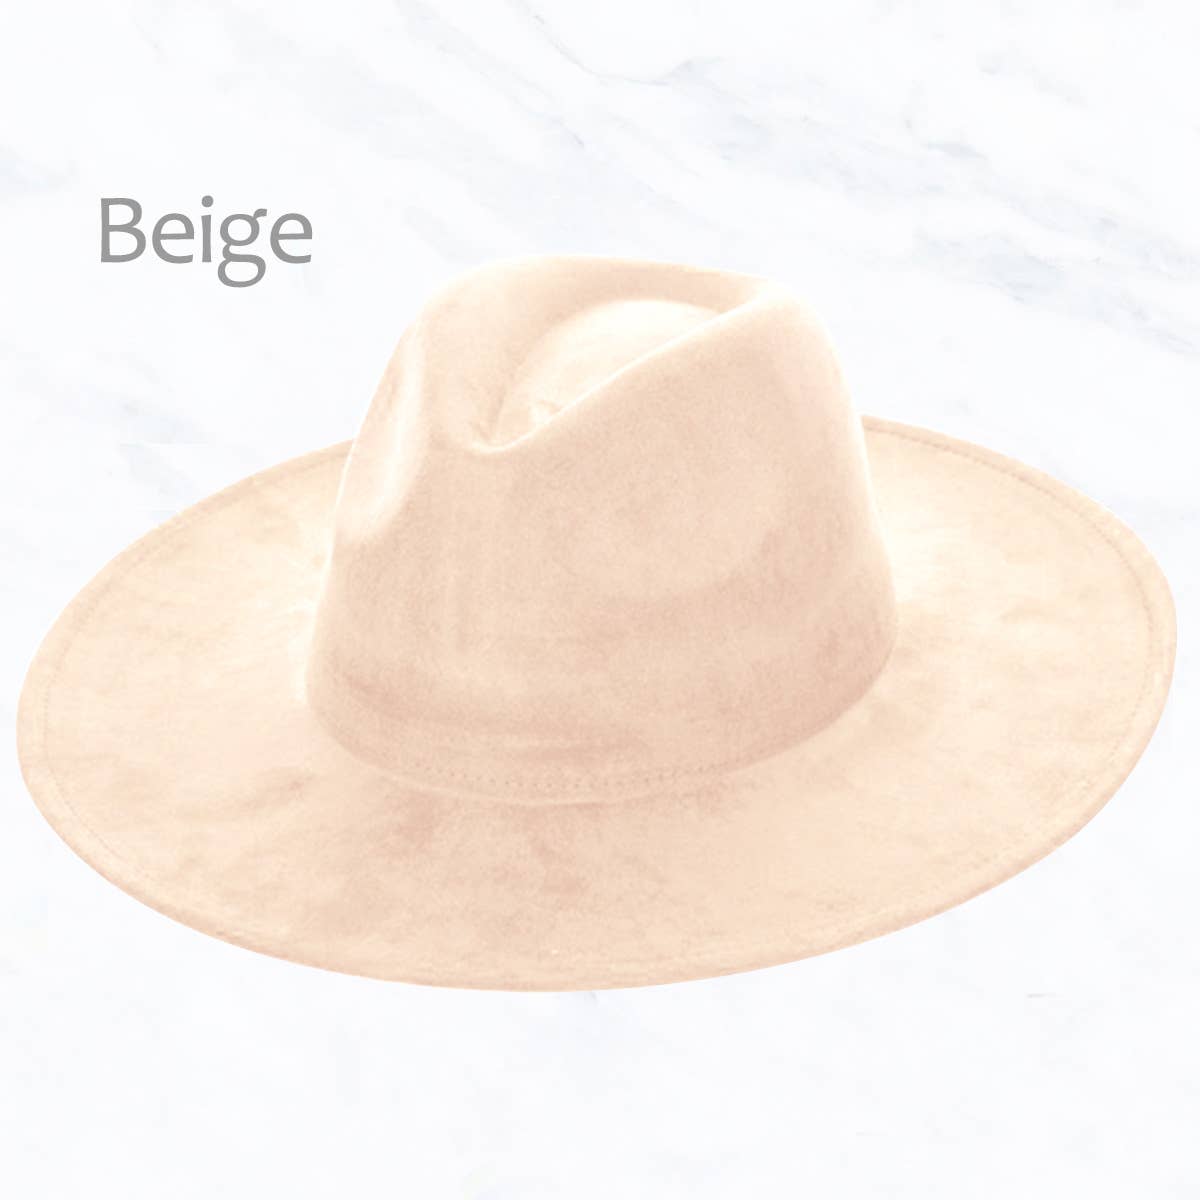 Suzie Q USA - Suede Large Eaves Peach Top Fedora Hat: Brown